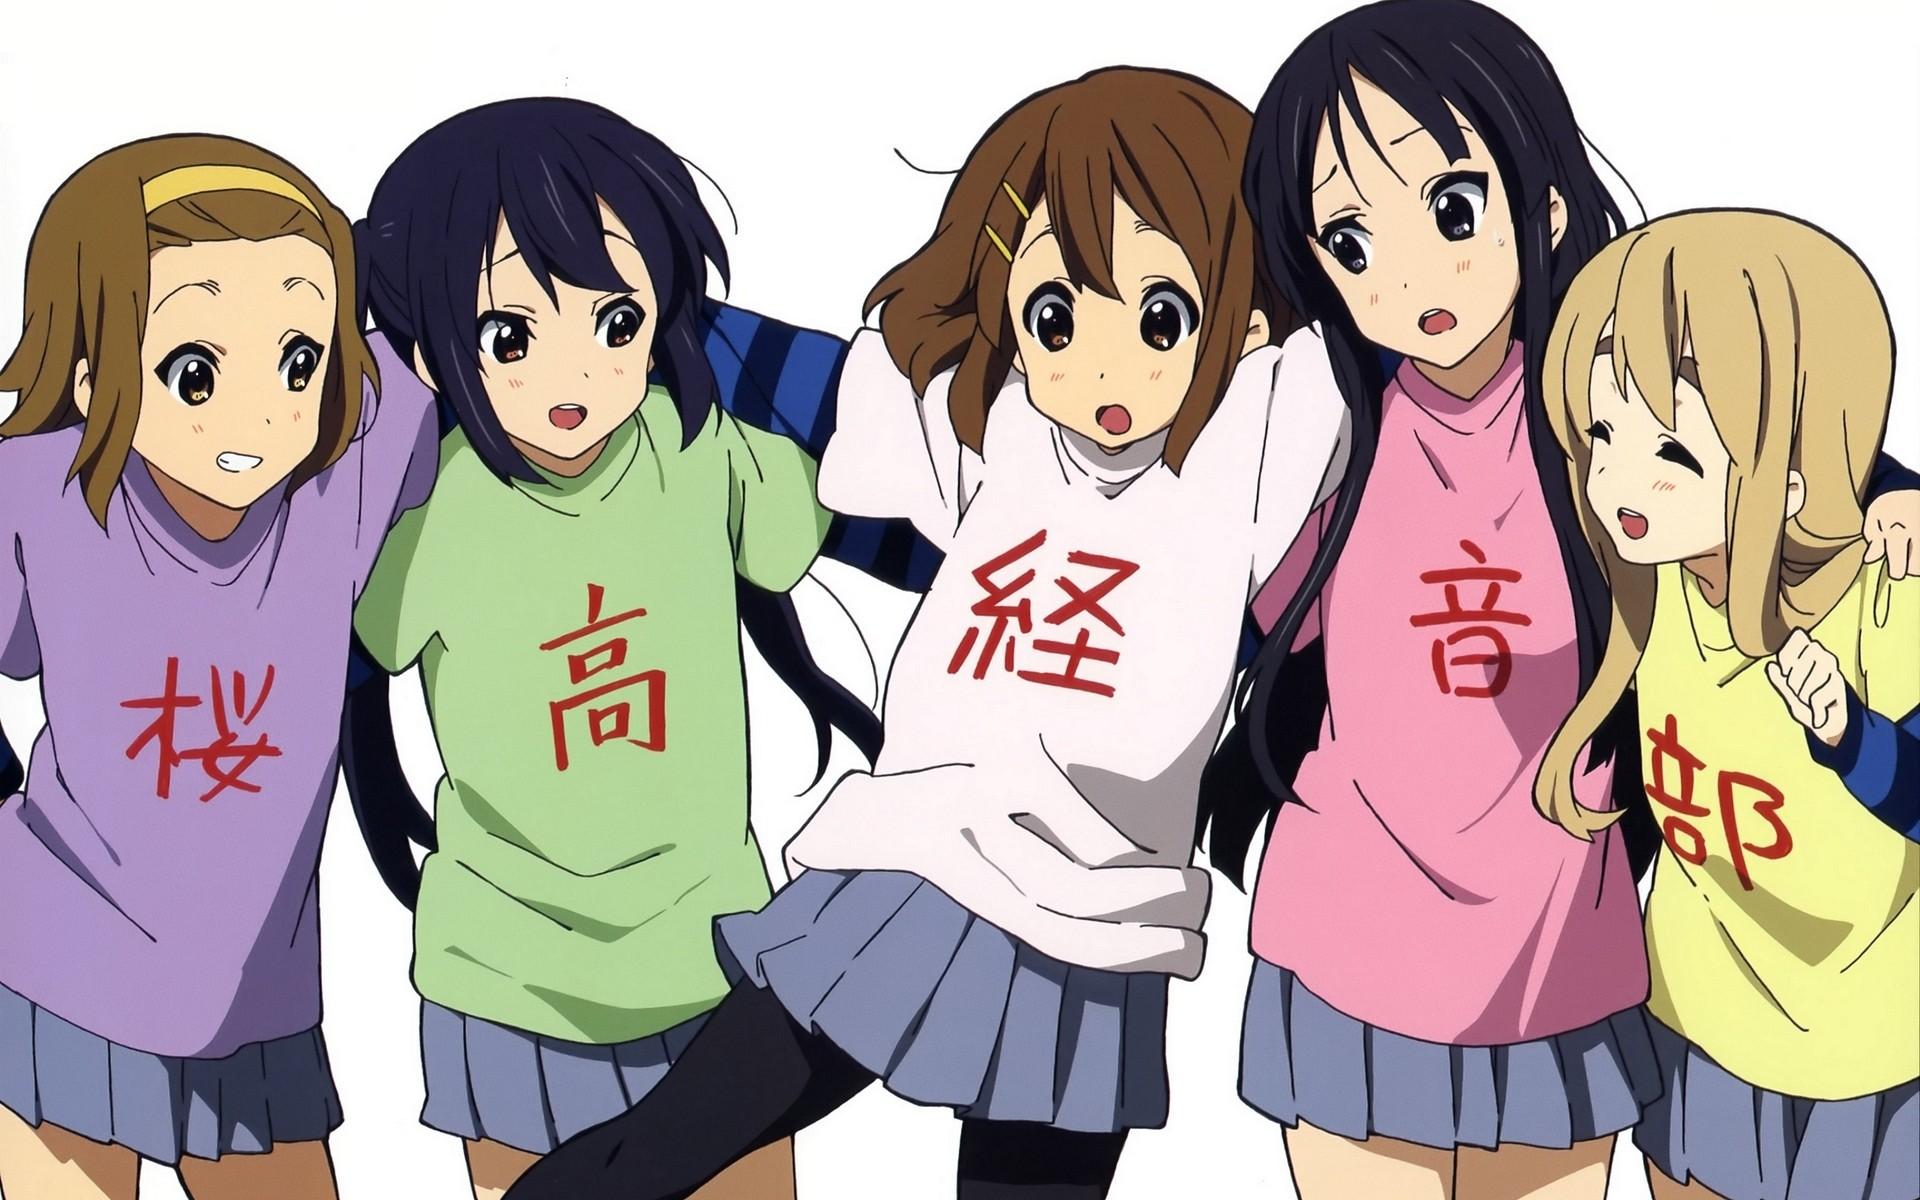 group of friends anime girls